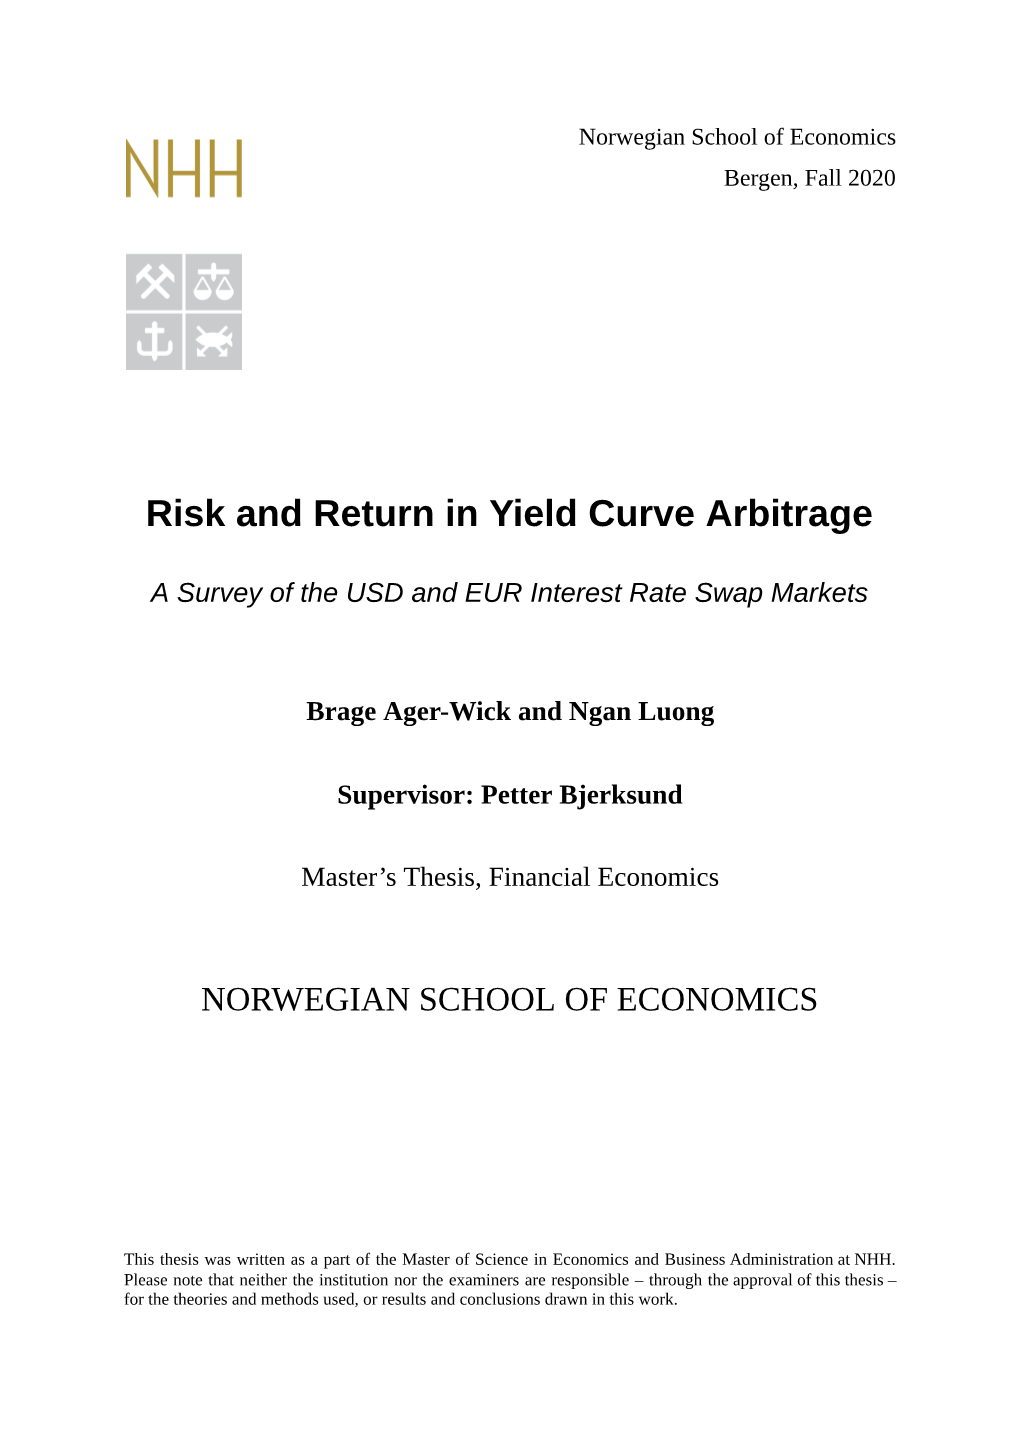 Risk and Return in Yield Curve Arbitrage